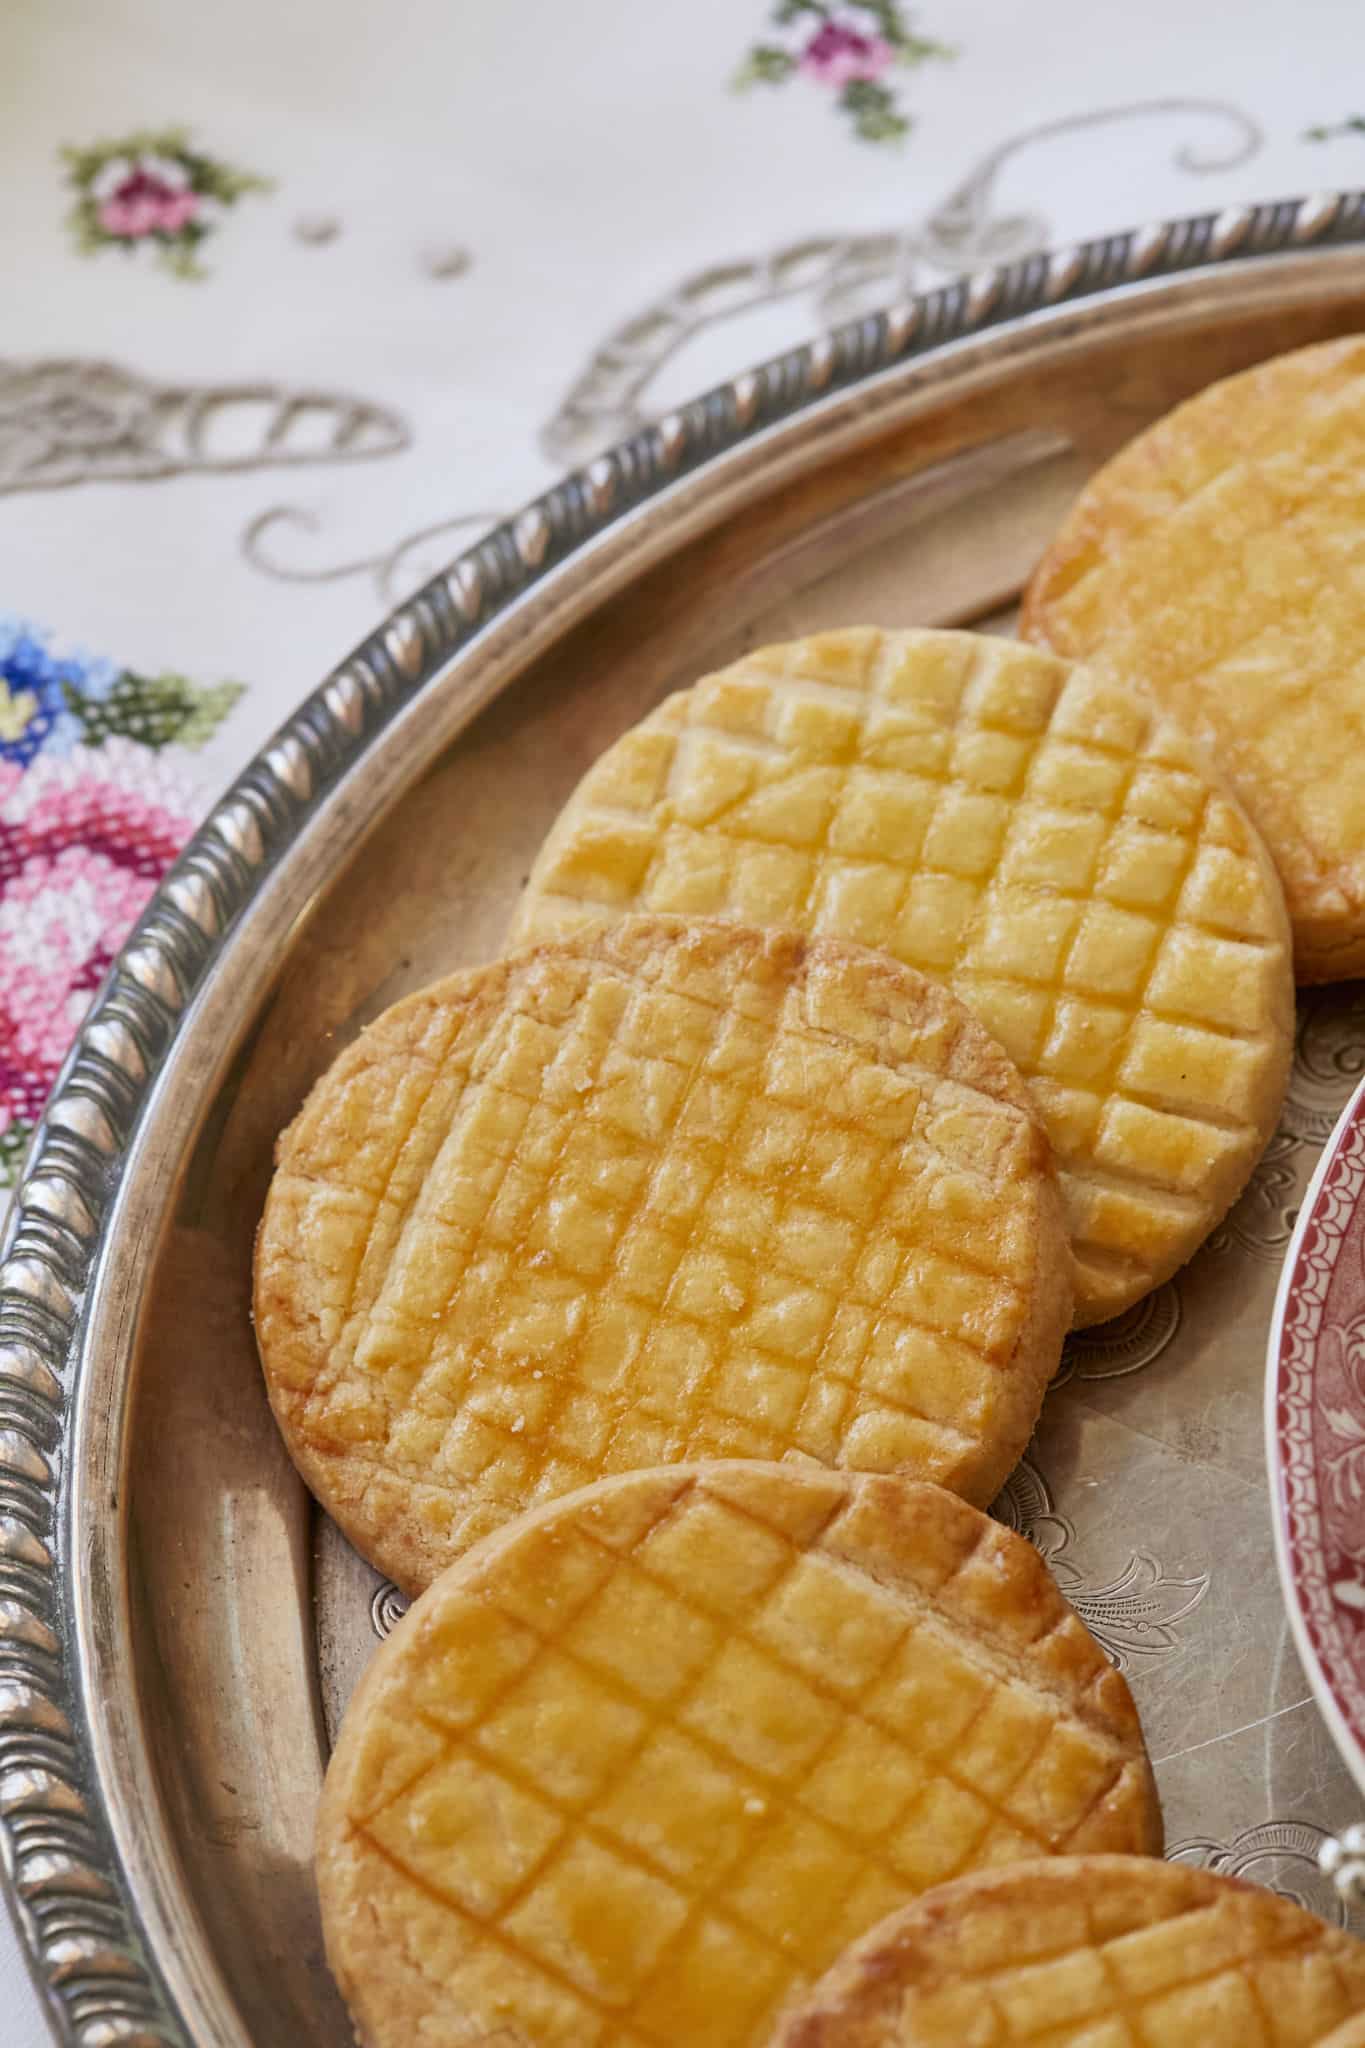 A close-up photo of homemade French Sable Cookies show a crosshatch design. The cookies are golden brown.